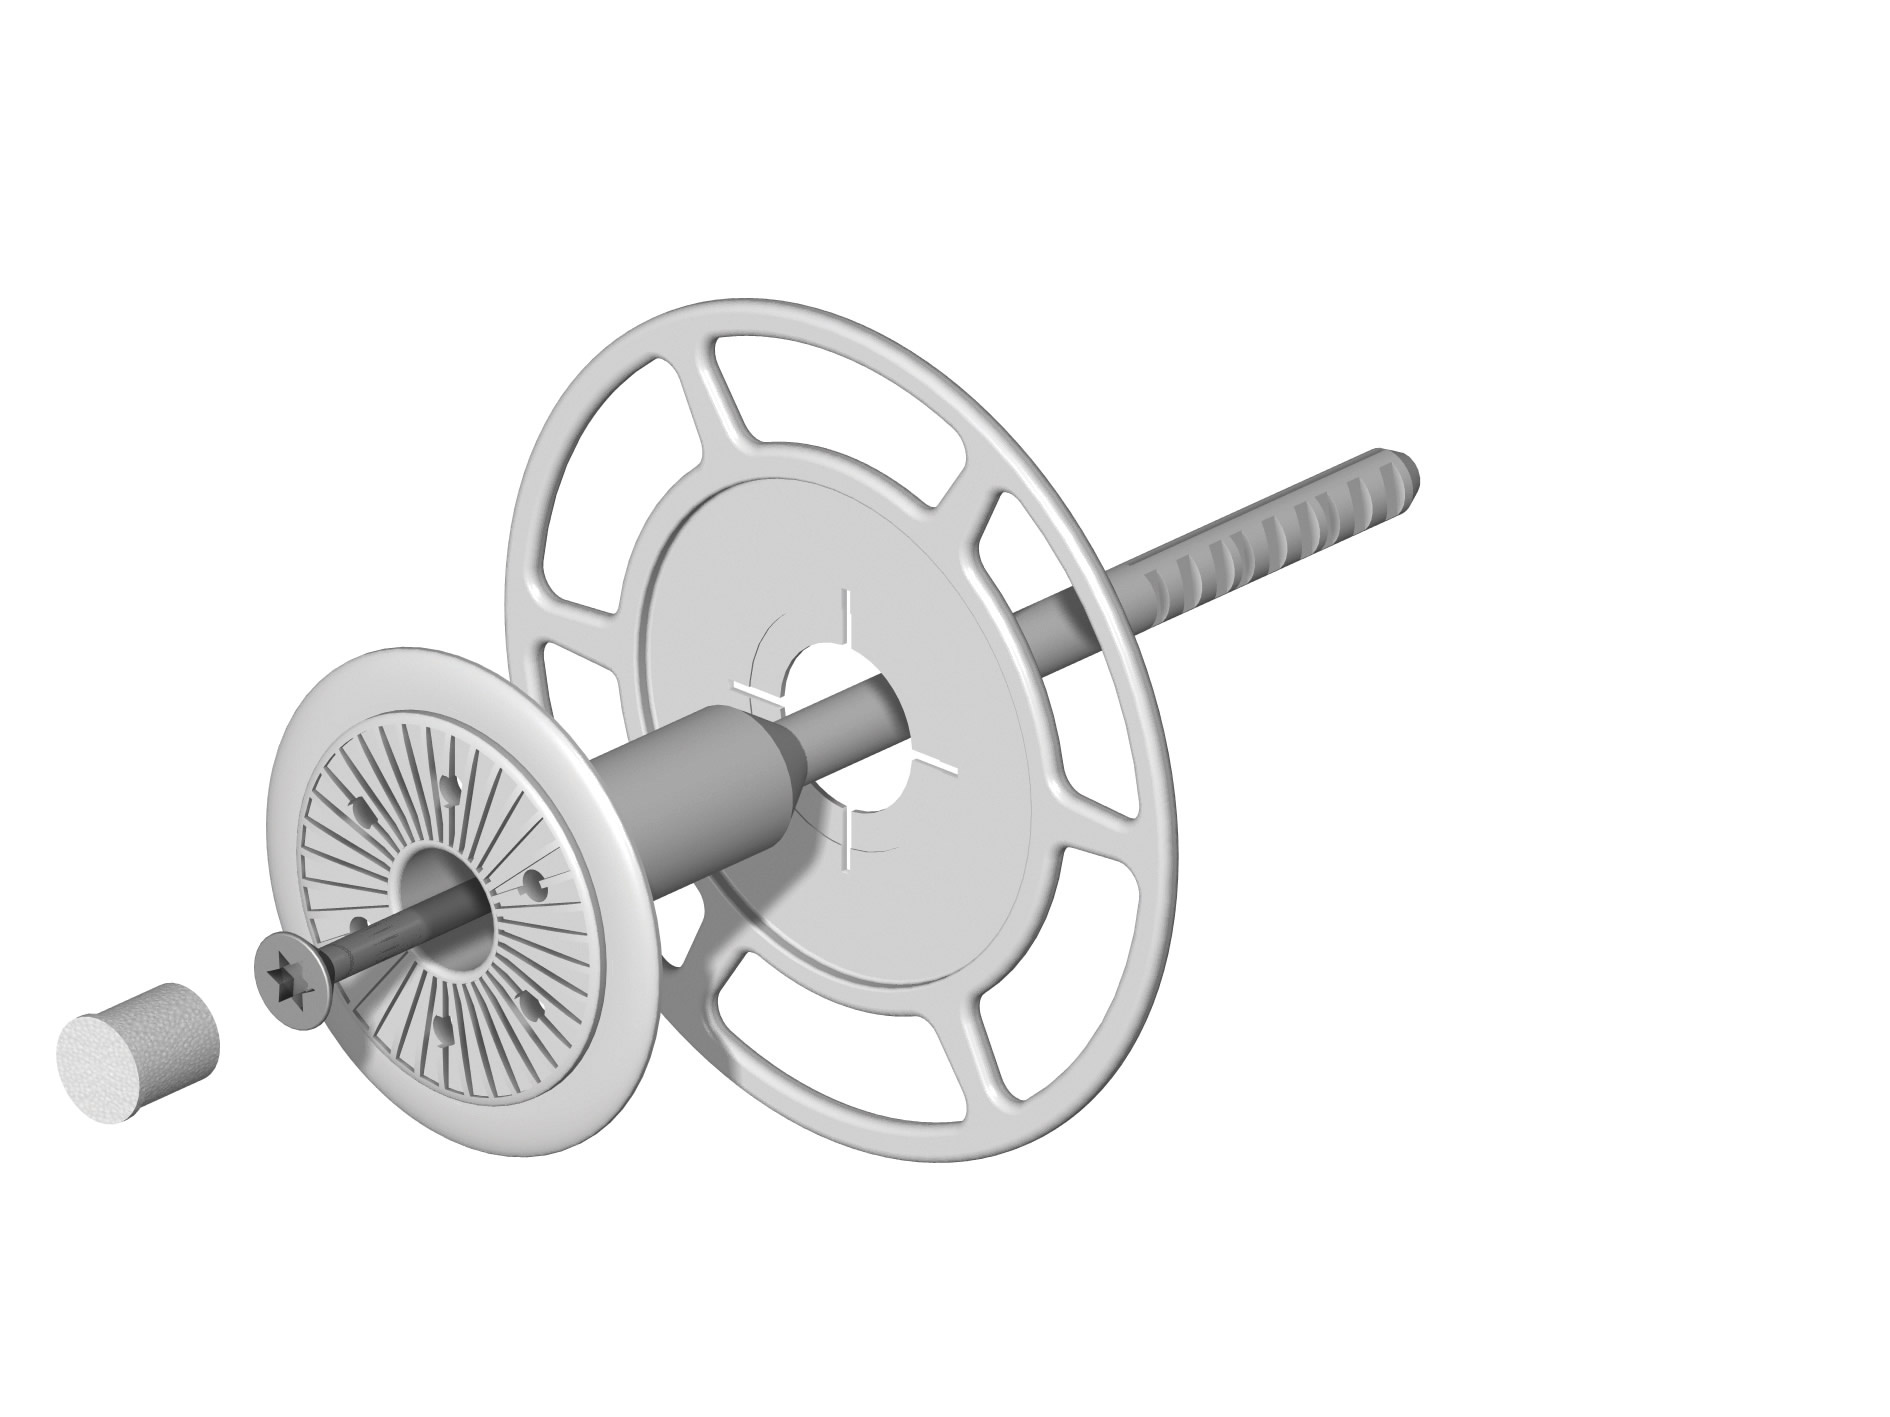 SBL 140 WASHER: Additional washers for anchors used to fix rock wool lamella panels